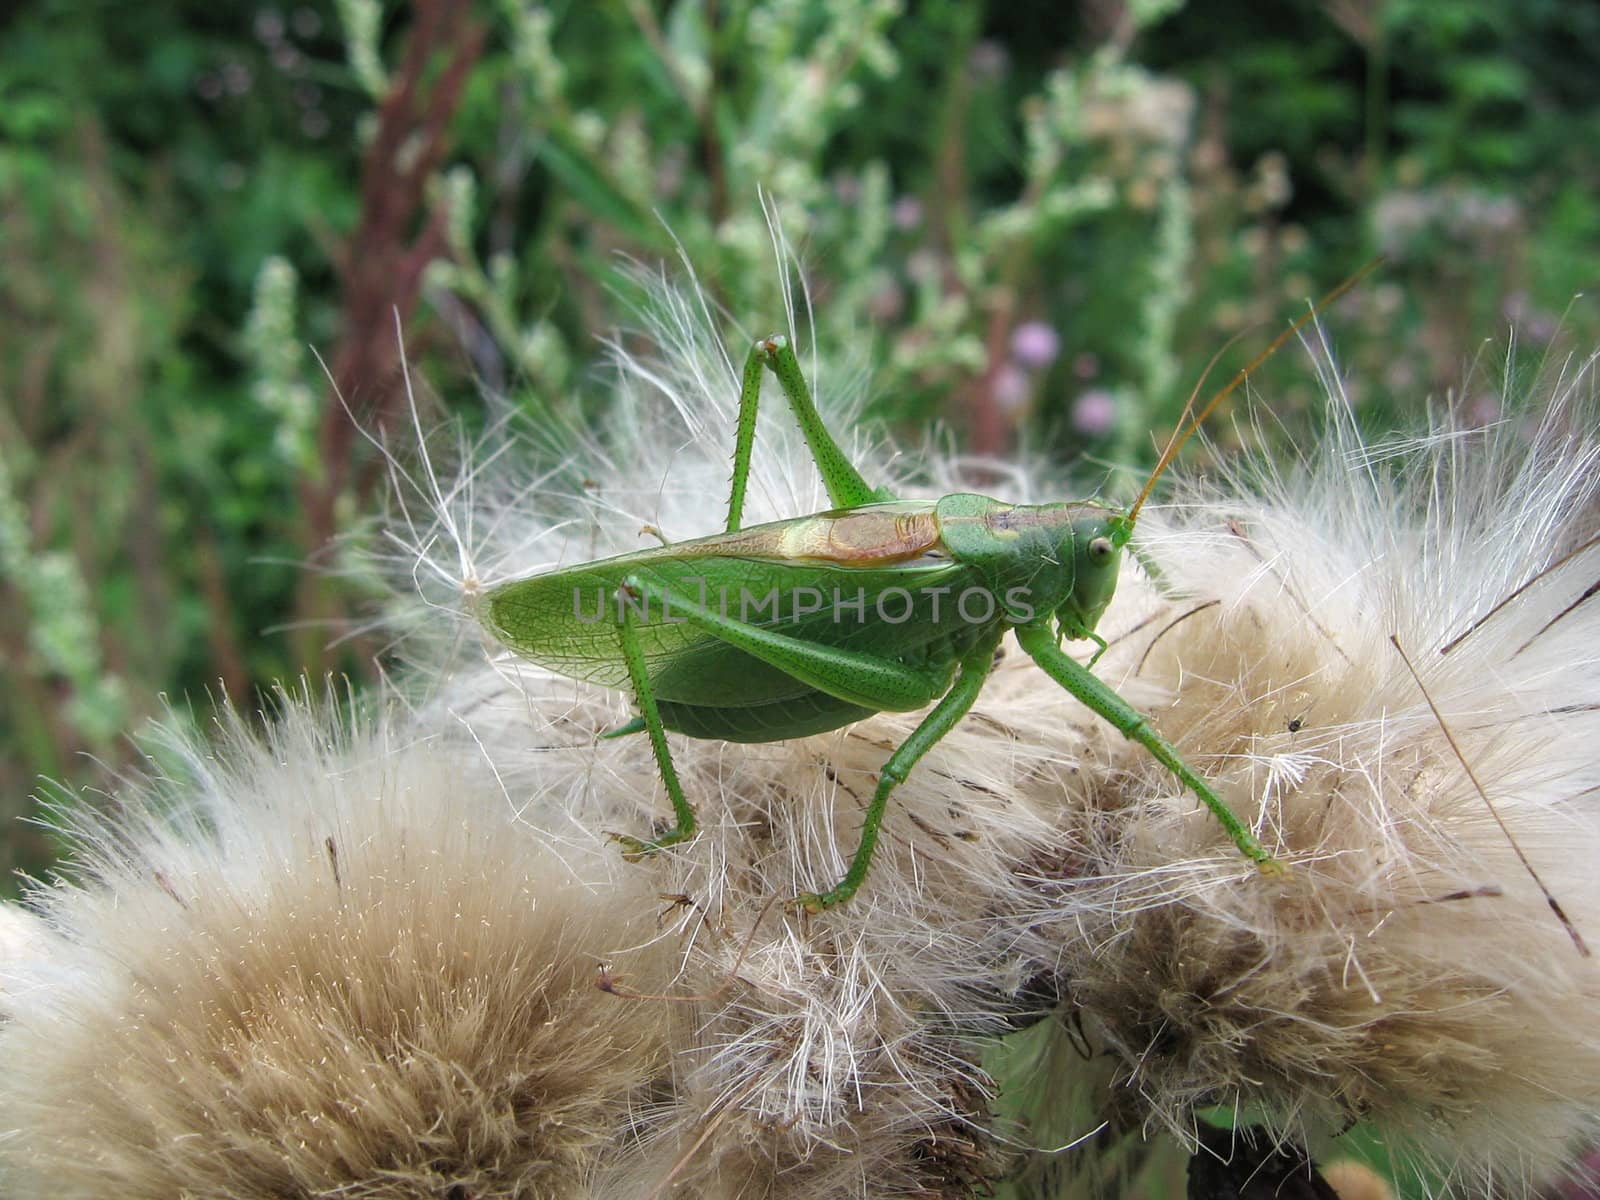 Small green grasshopper on the fuzzy plant